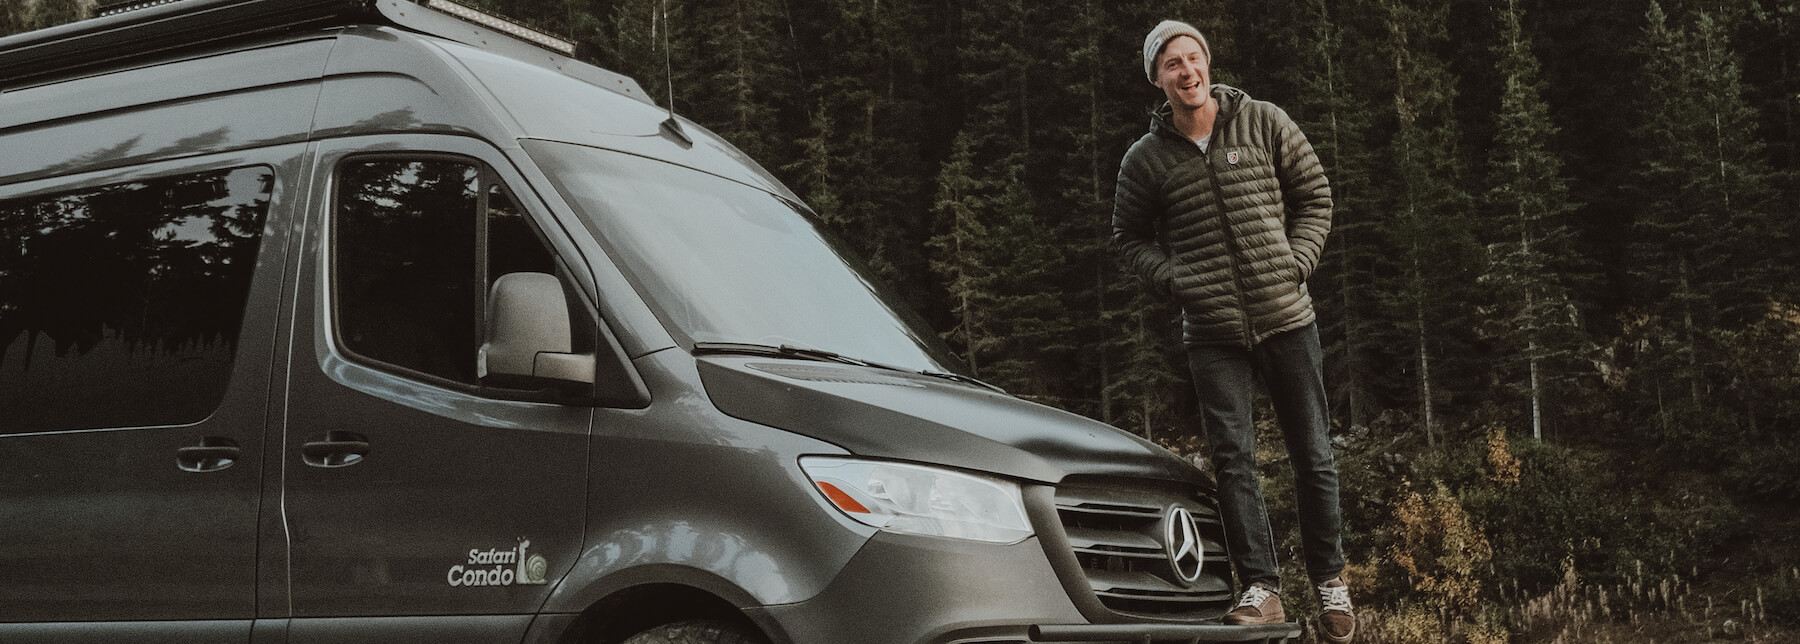 Life on the road: most popular vanlife accessories according to our community